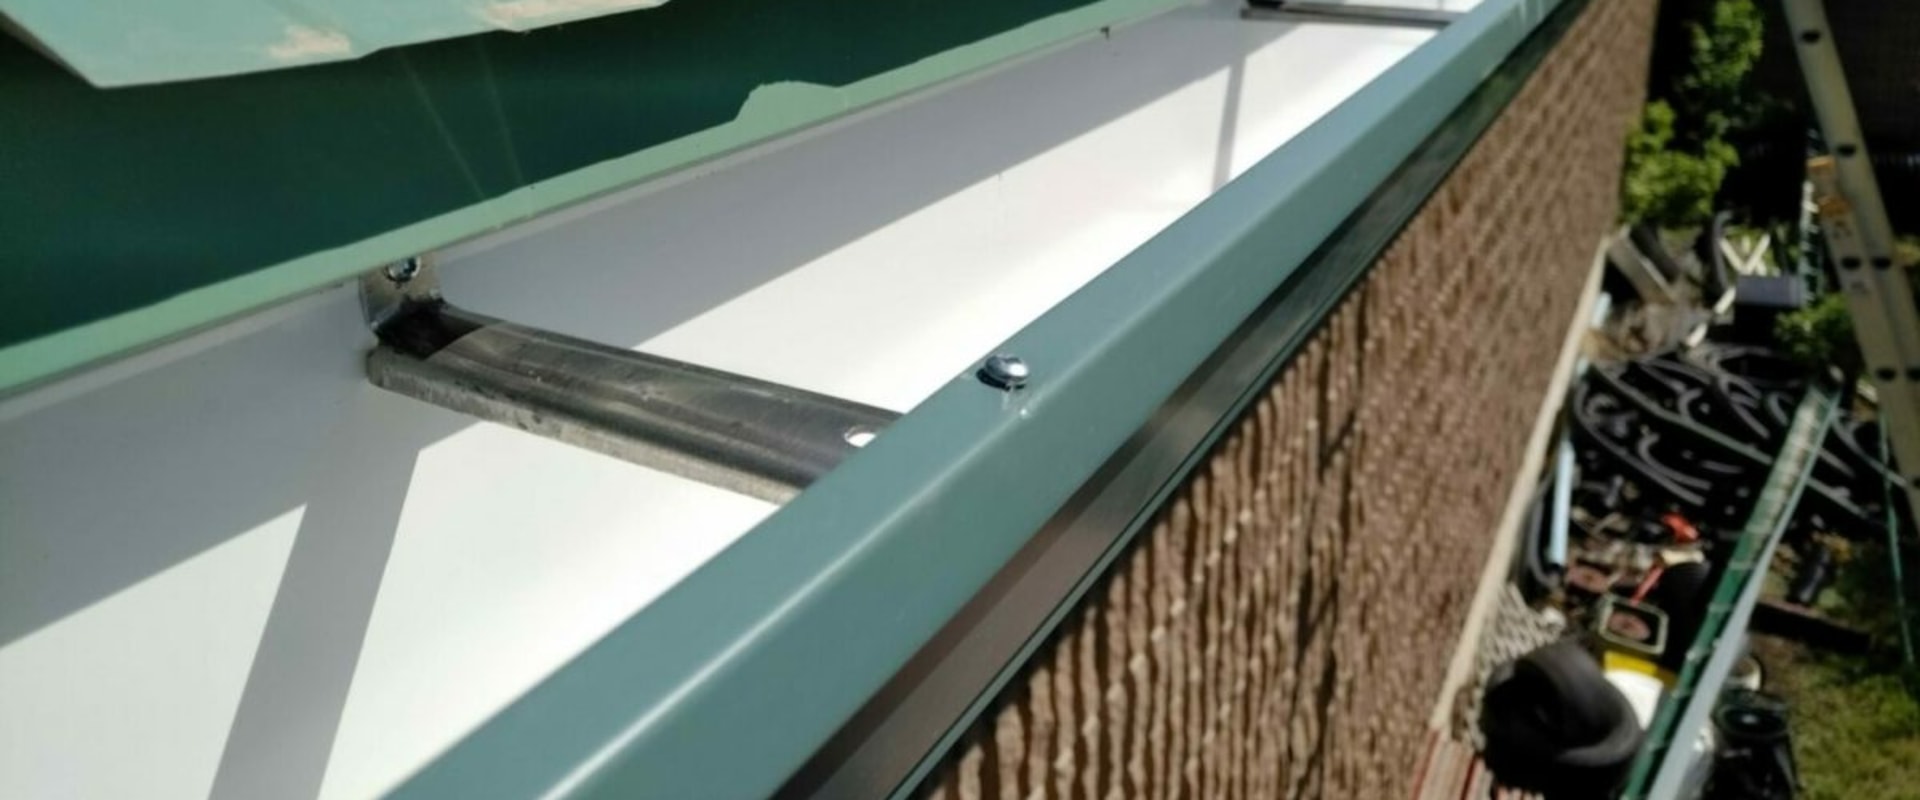 Common Mistakes to Avoid When Installing Gutters